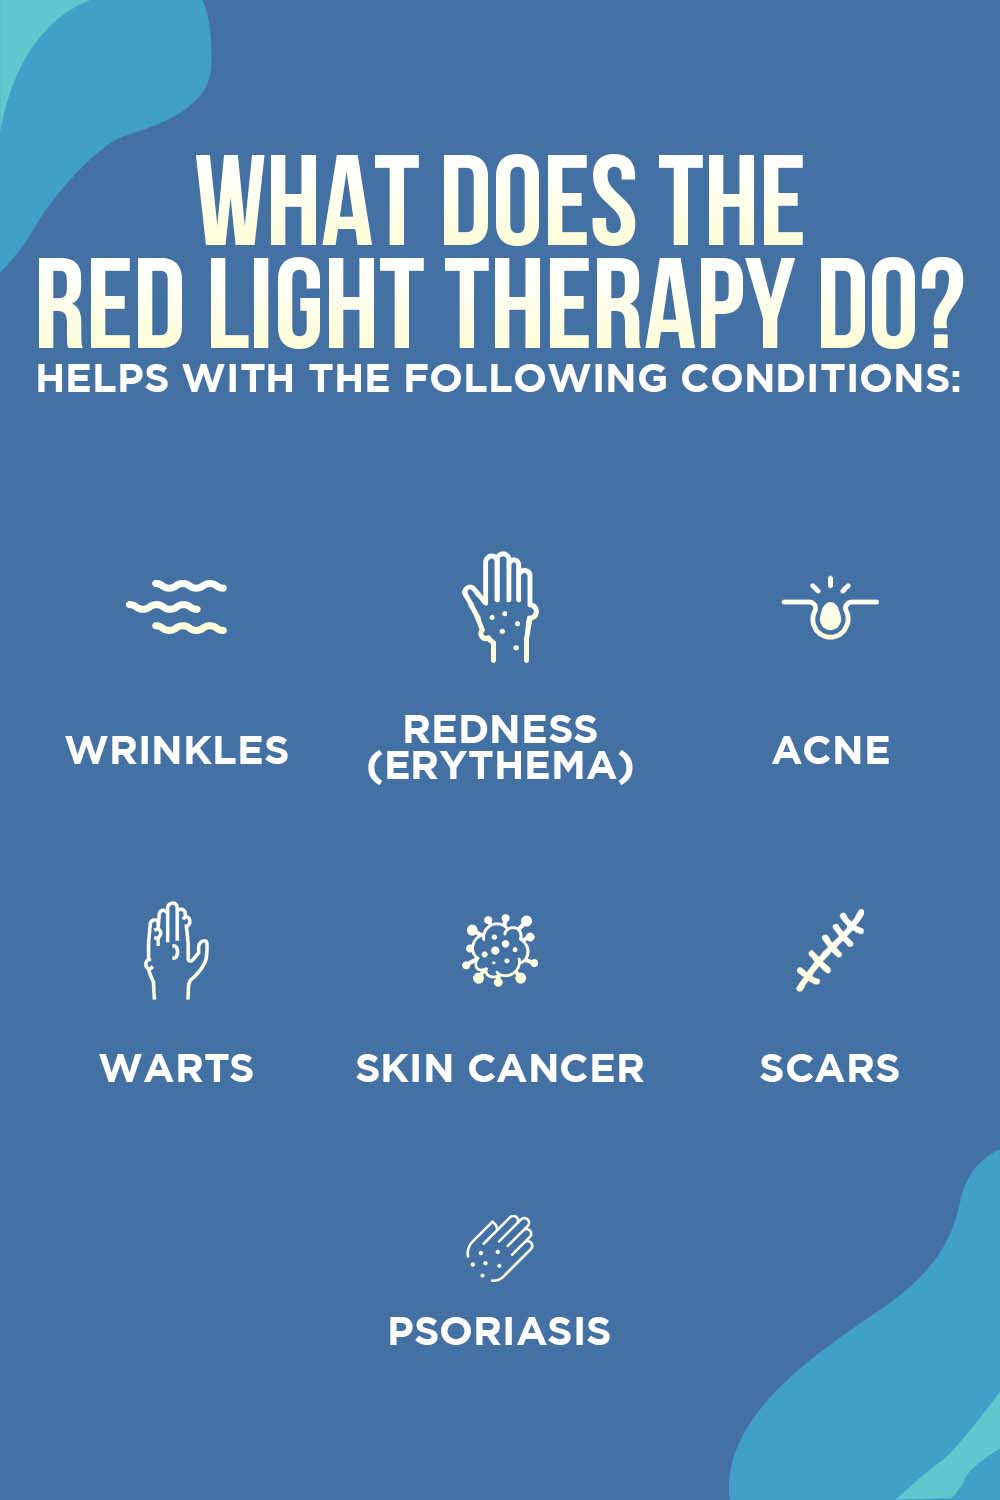 How Many Minutes a Day Should You Do Red Light Therapy?